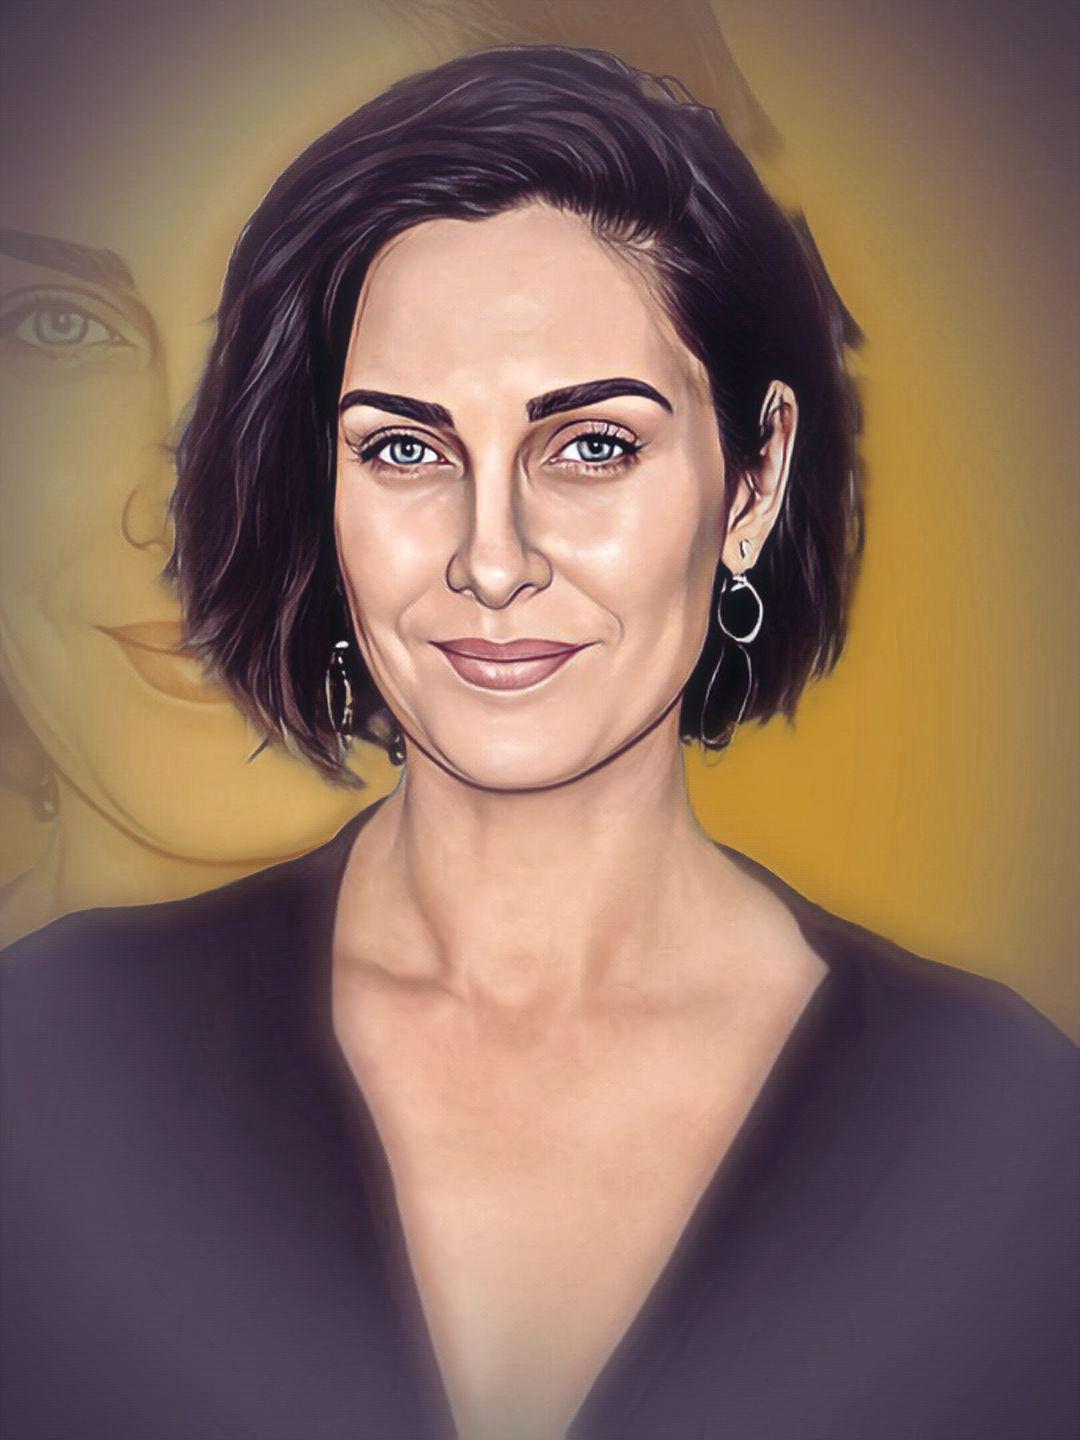 Tamil Mami Fuck Face Reaction - Carrie-Anne Moss - Celeb ART - Beautiful Artworks of Celebrities,  Footballers, Politicians and Famous People in World | OpenSea